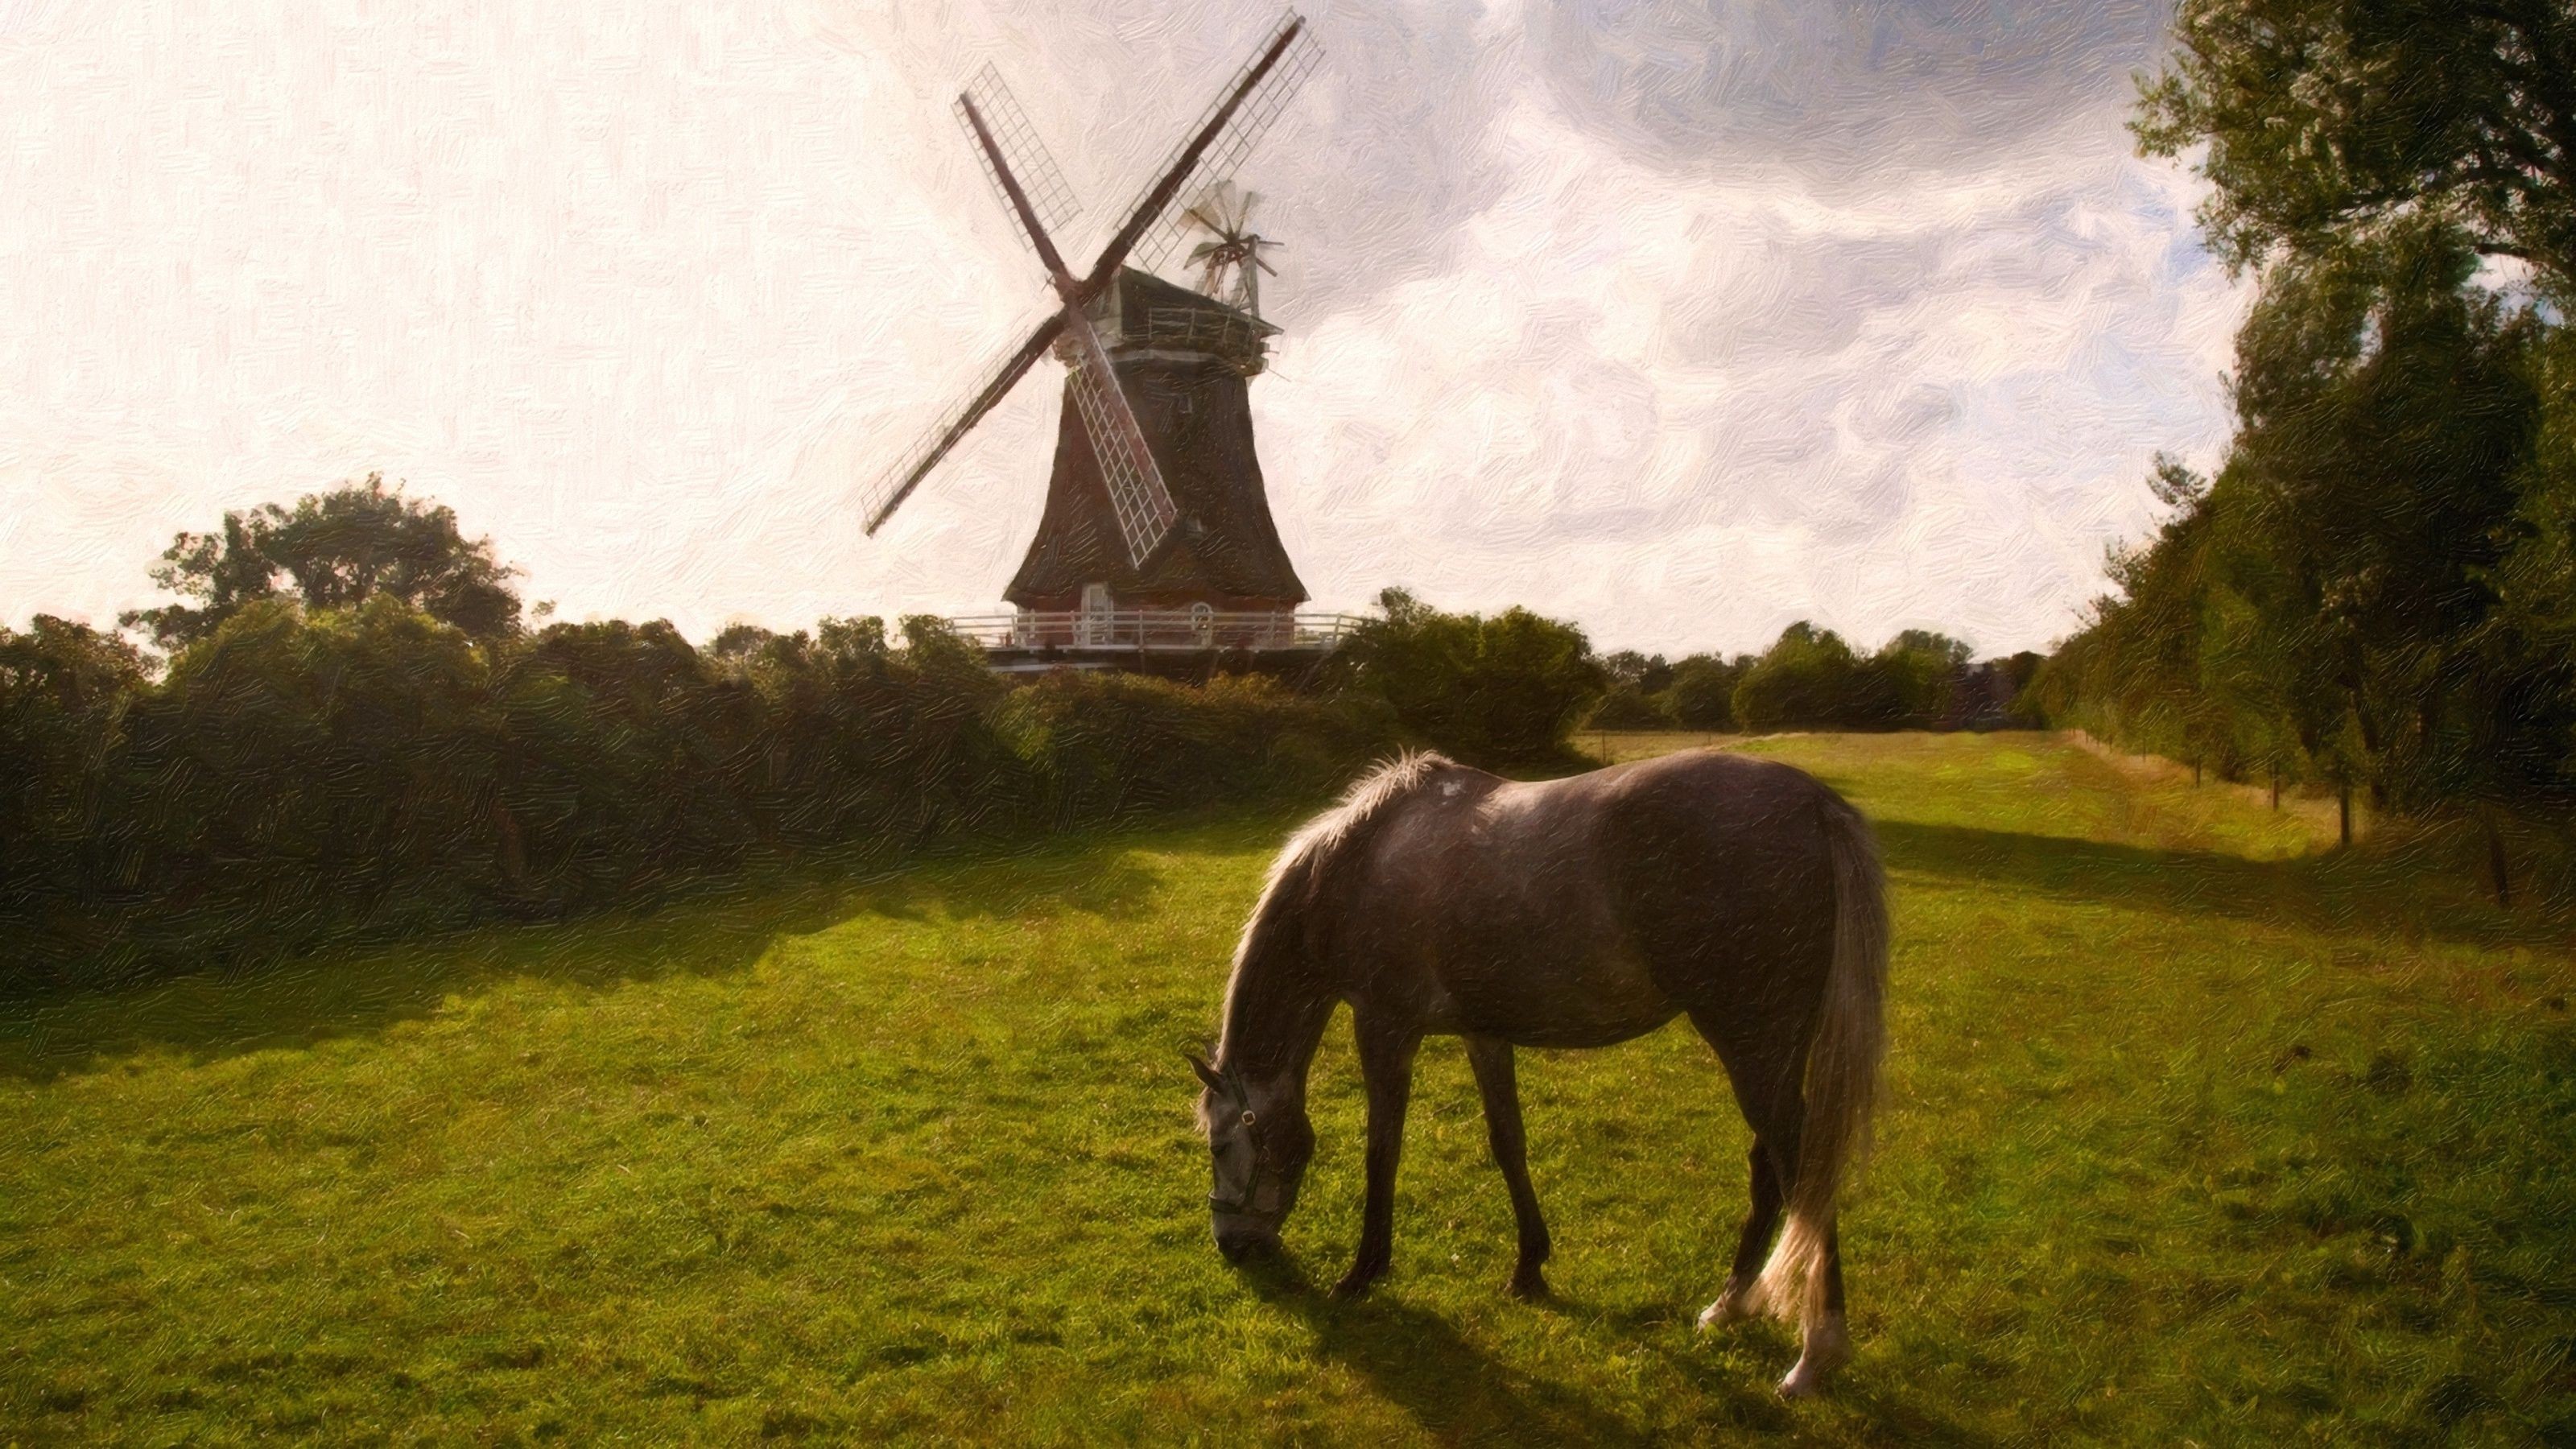 General 3200x1800 oil painting windmill horse landscape animals mammals painting artwork outdoors